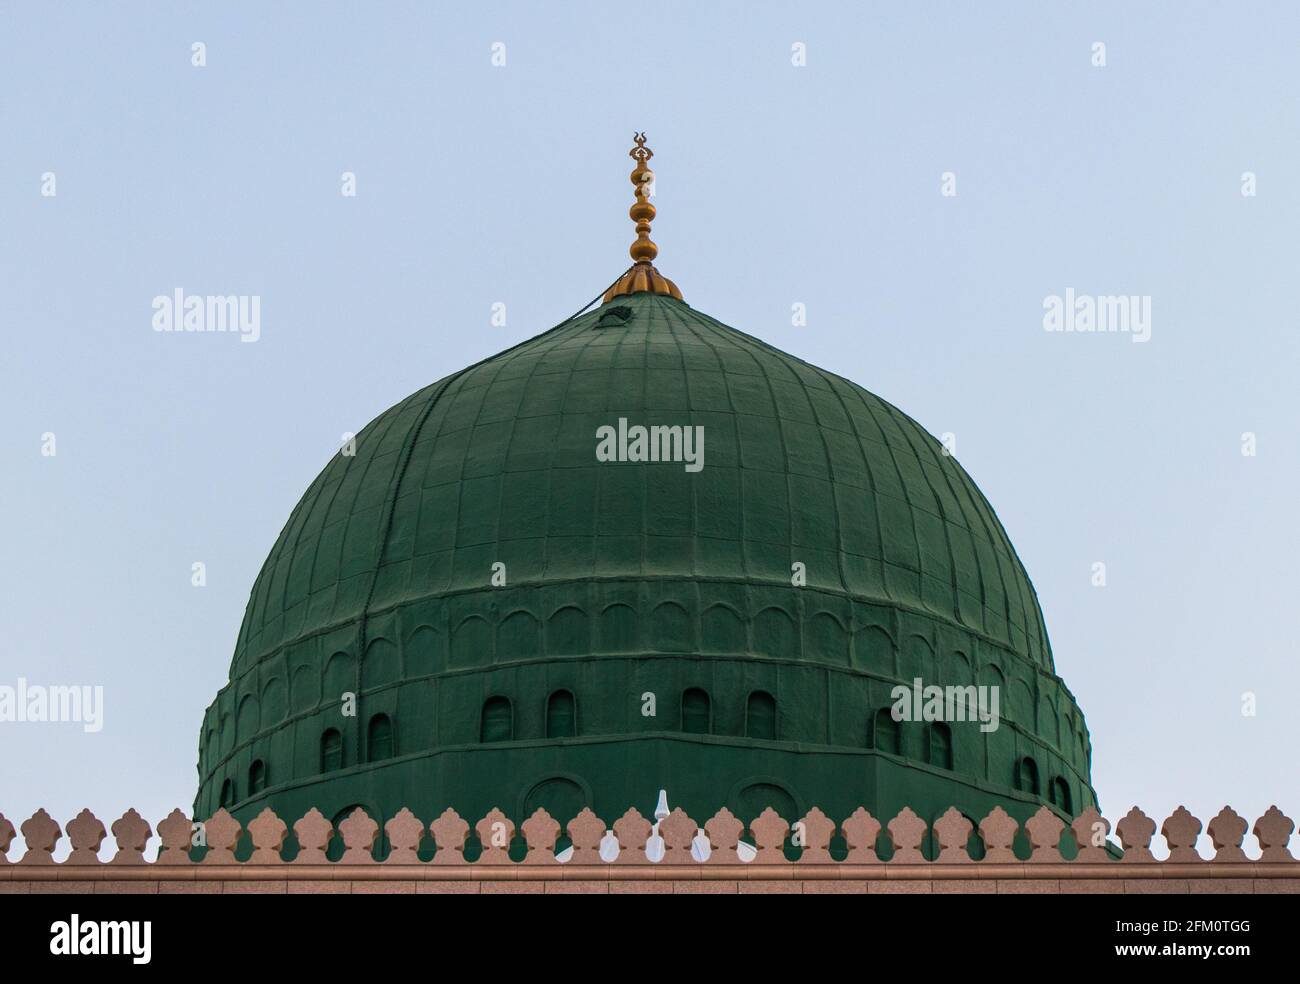 External image of the Prophet's Mosque in Medina in Saudi Arabia, The green dome of the mosque. Masjid Nabawi Stock Photo